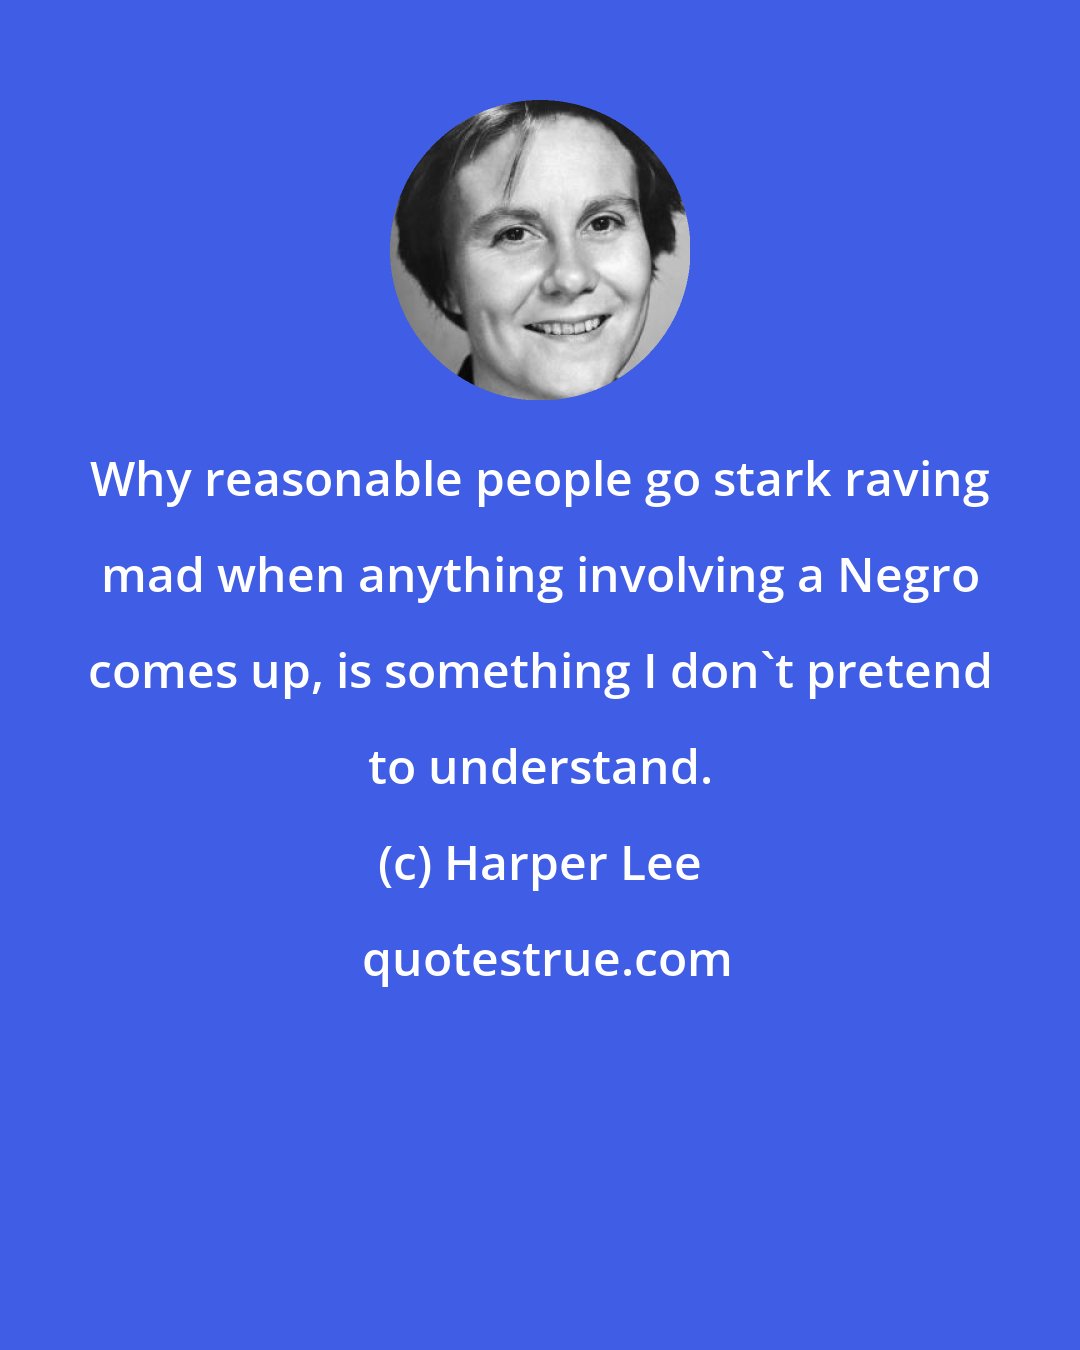 Harper Lee: Why reasonable people go stark raving mad when anything involving a Negro comes up, is something I don't pretend to understand.